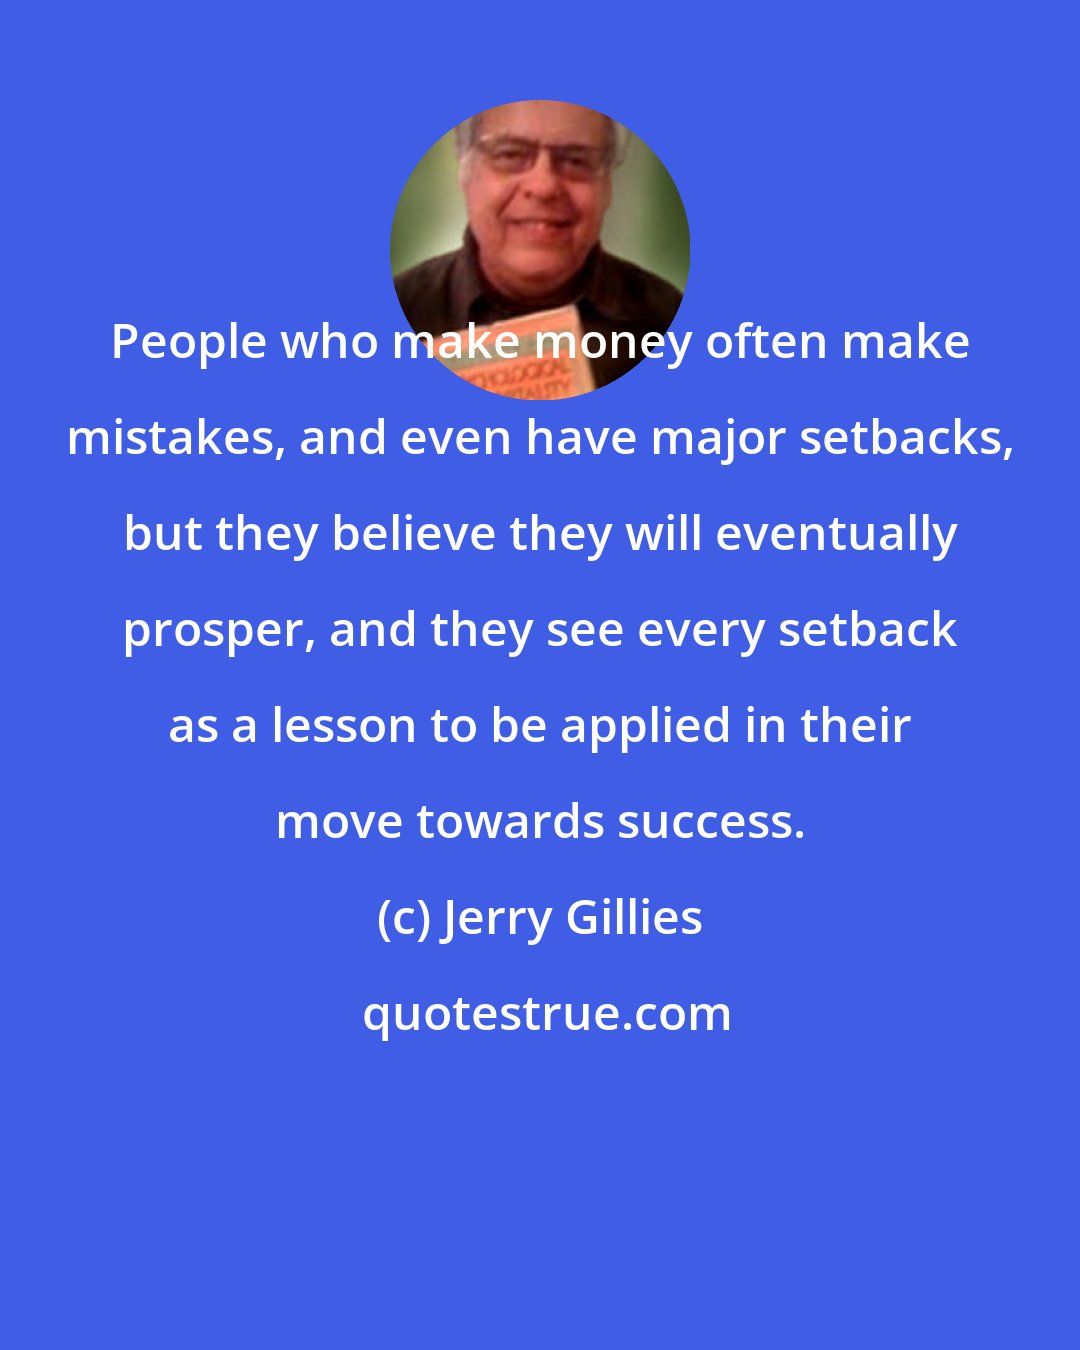 Jerry Gillies: People who make money often make mistakes, and even have major setbacks, but they believe they will eventually prosper, and they see every setback as a lesson to be applied in their move towards success.